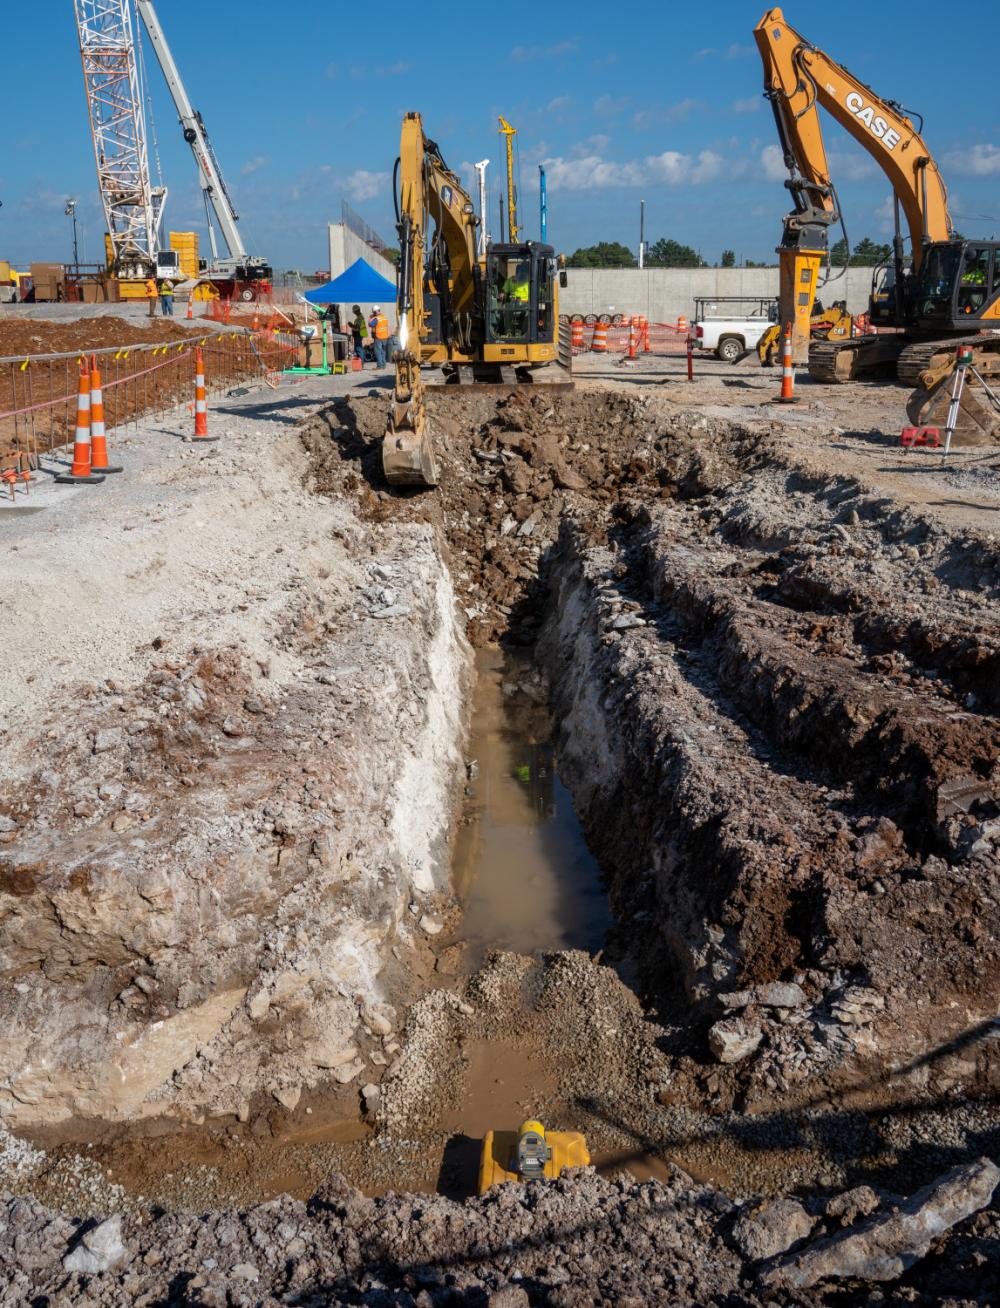 Major features of Louisville VA Medical Center project lay down foundations for future work